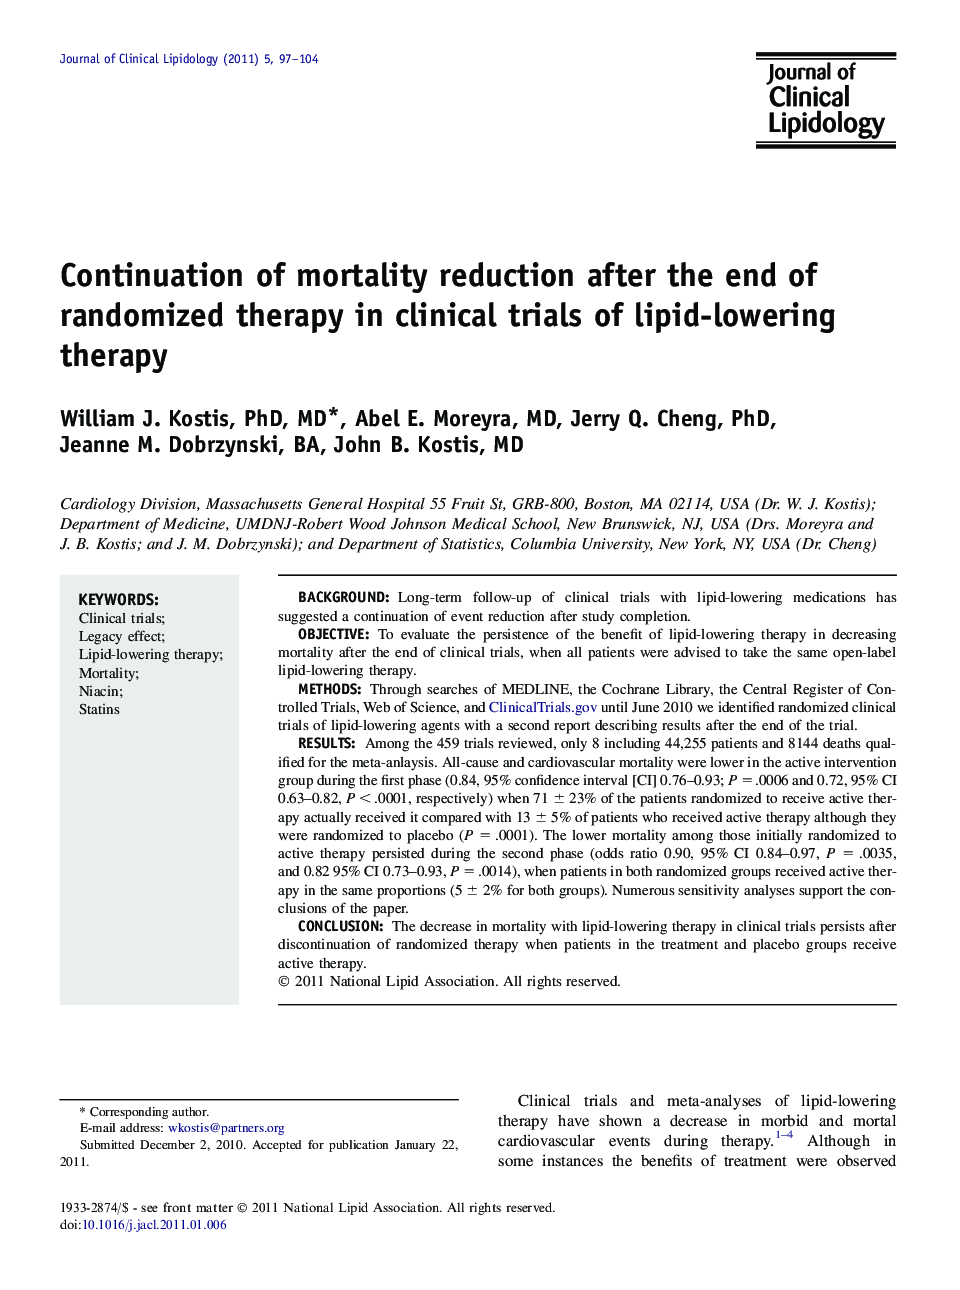 Continuation of mortality reduction after the end of randomized therapy in clinical trials of lipid-lowering therapy